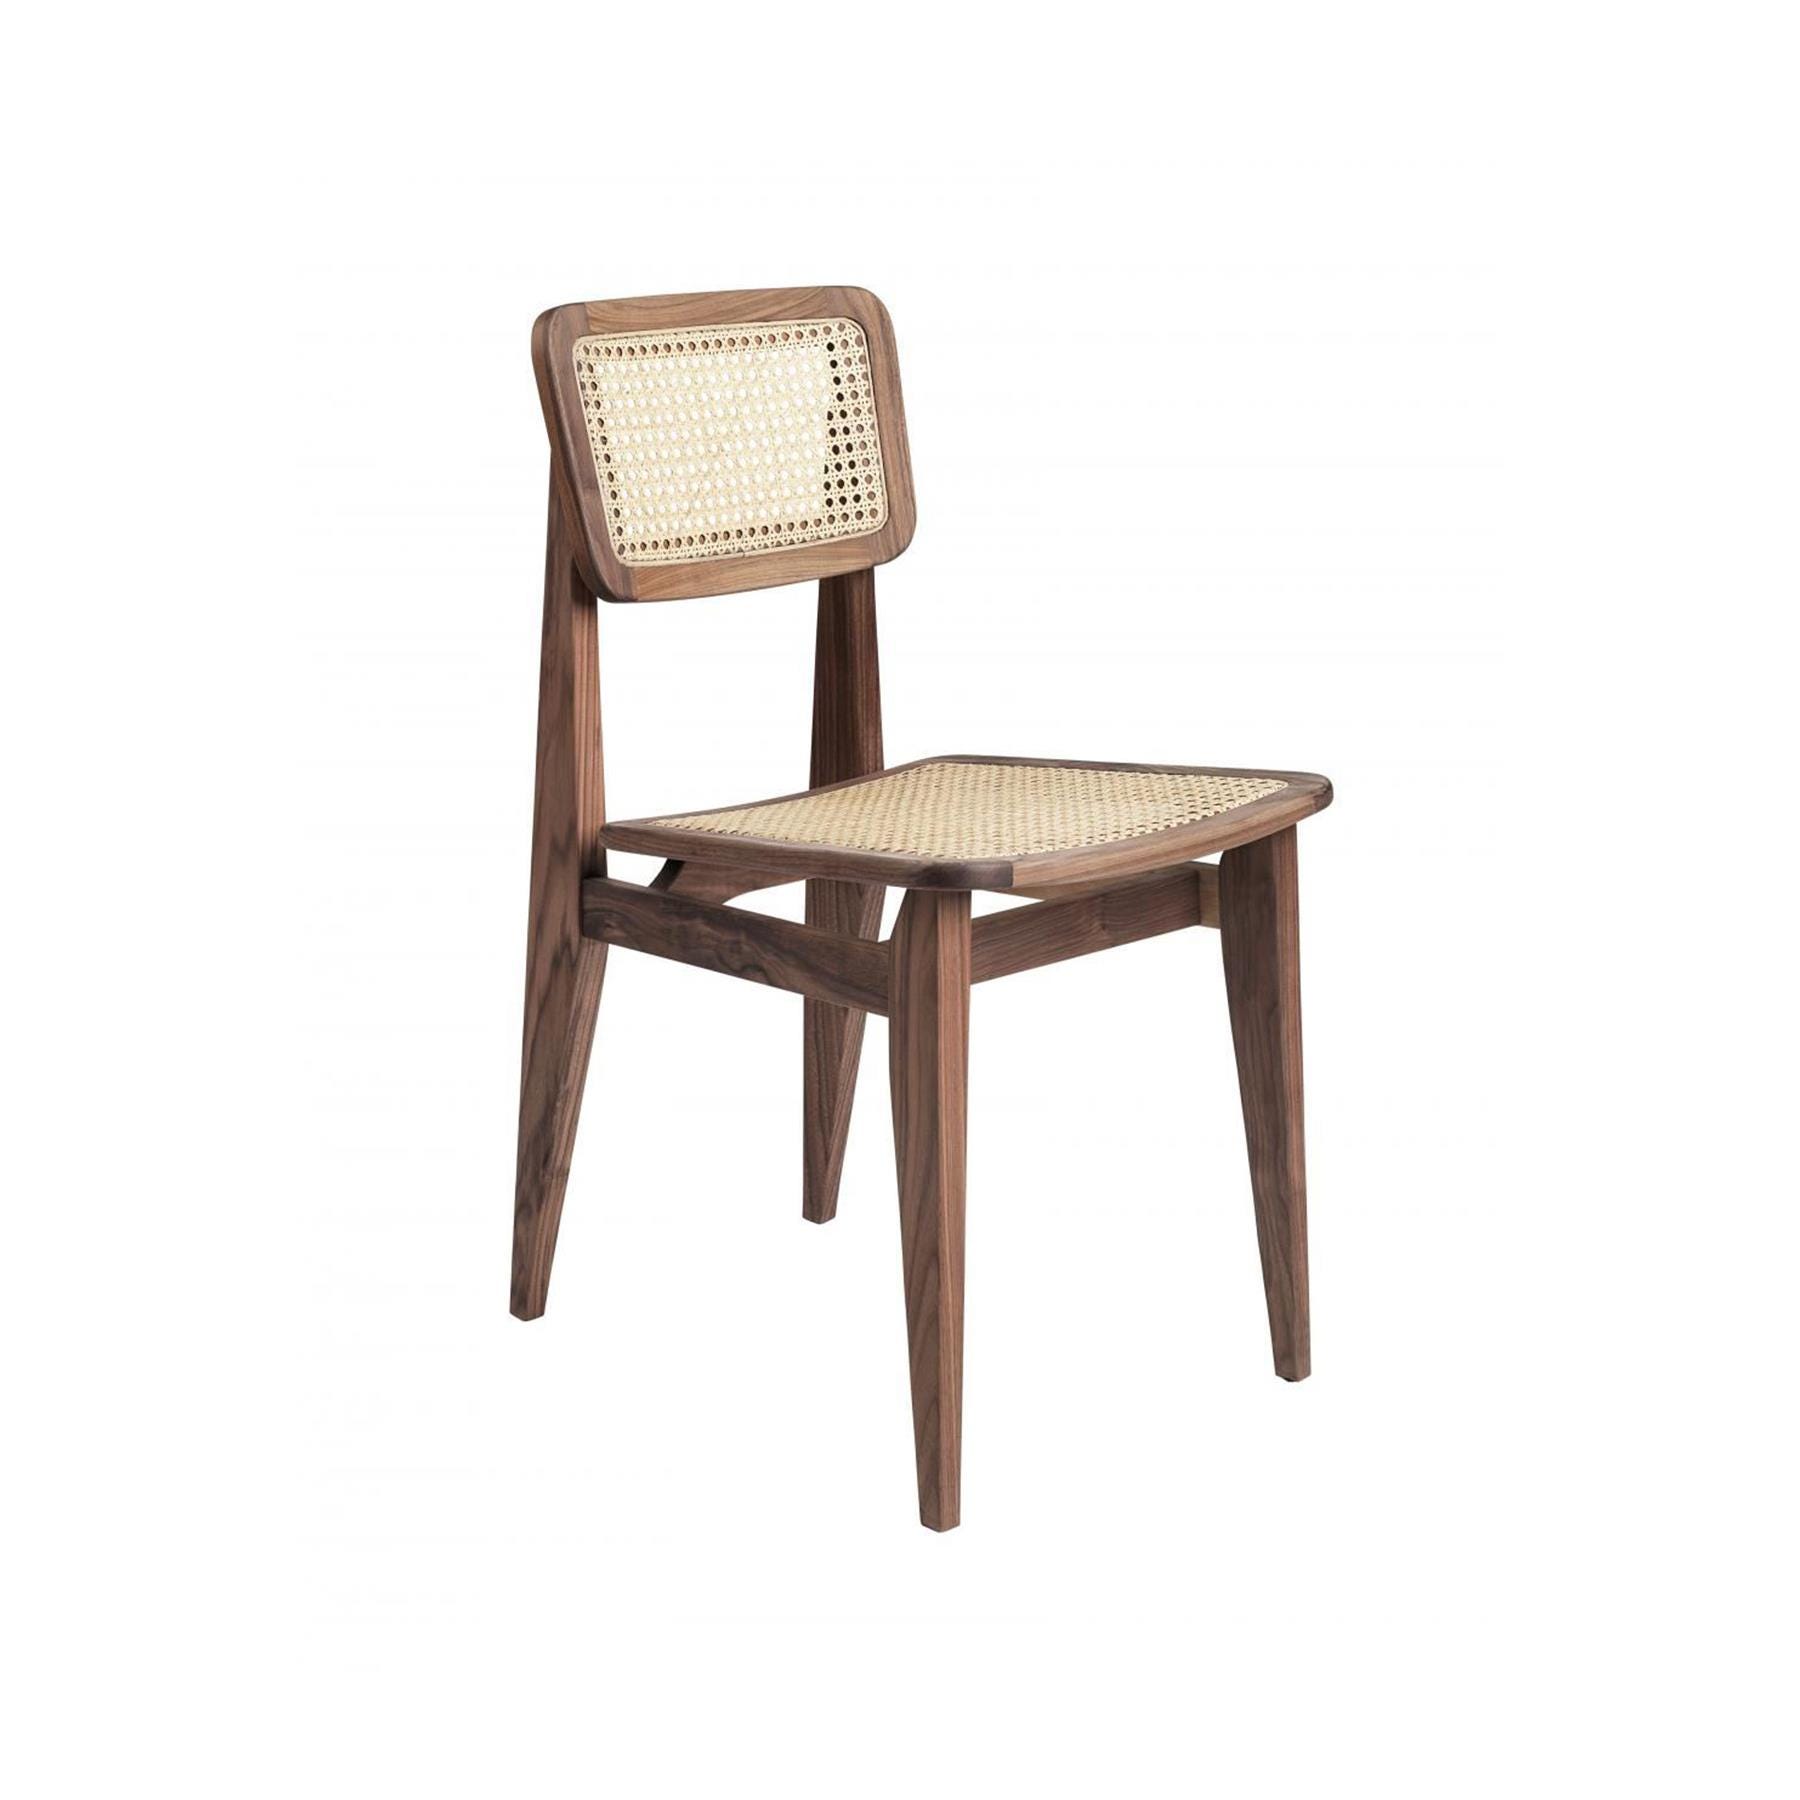 Cchair Dining Chair Cane Seat American Walnut Oiled Base